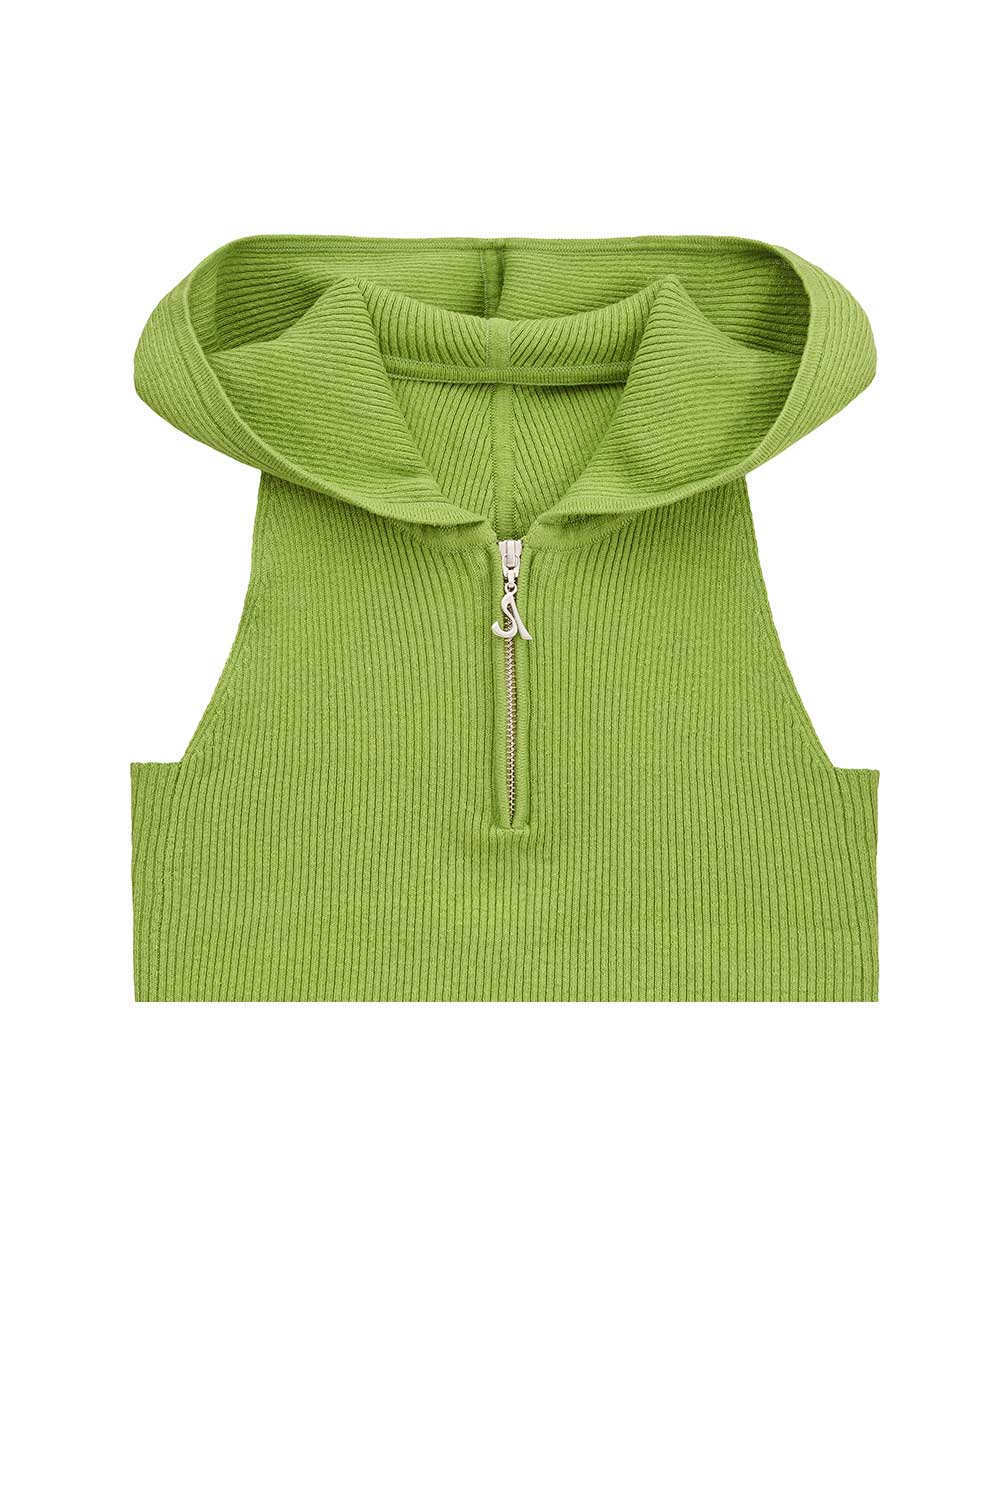 LACE-UP HALTER HOODED KNIT SLEEVELESS (GREEN)